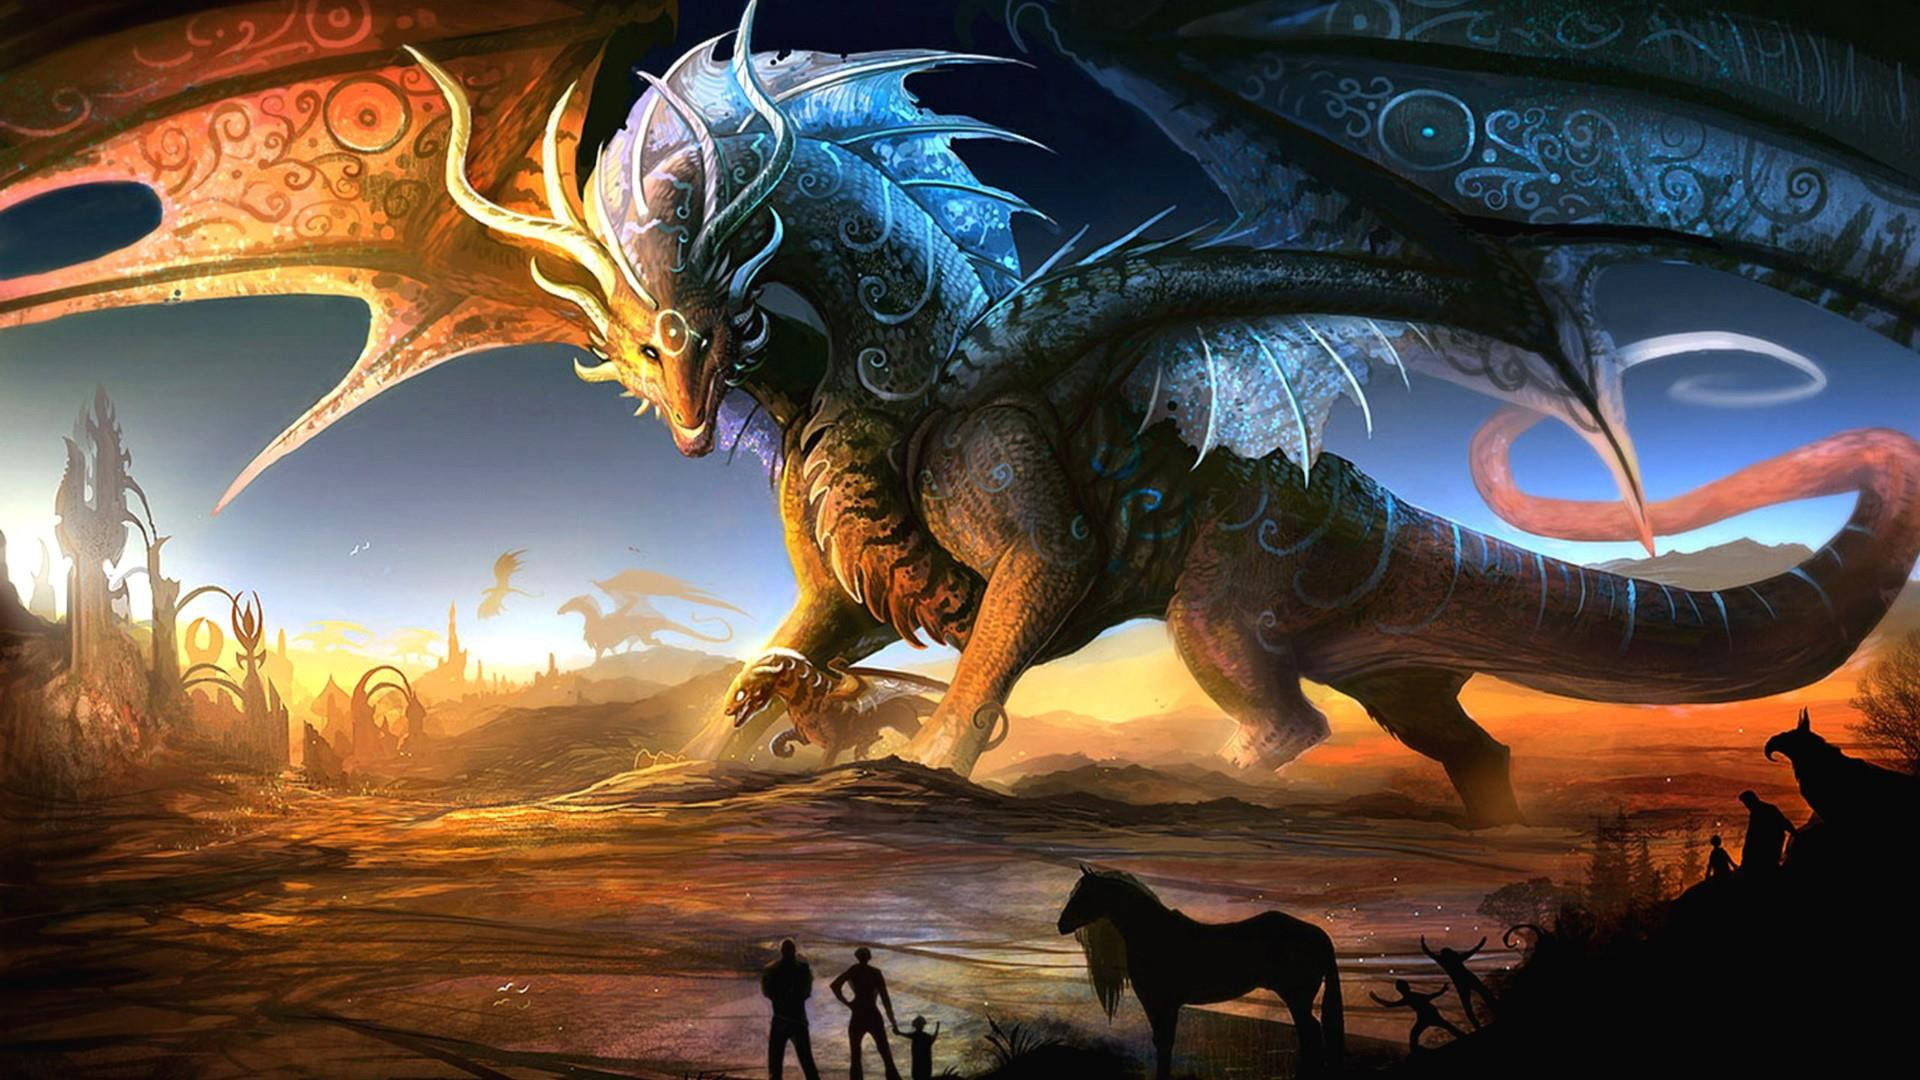 Orange Blue Dragons Mythical Creatures Picture